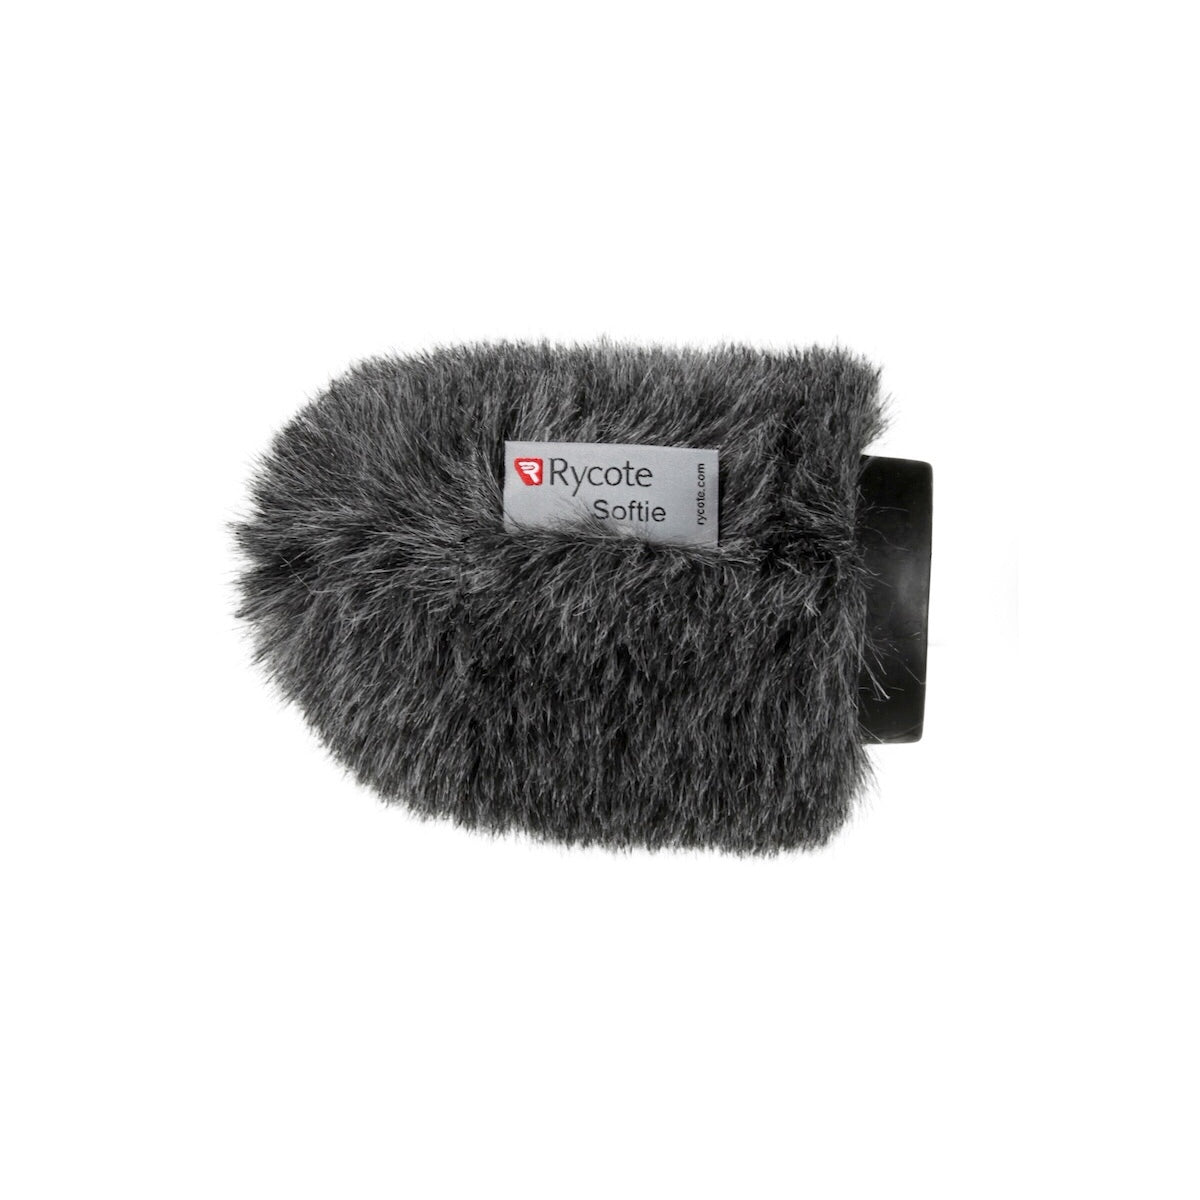 Rycote 10cm Classic-Softie (19/22), Grey, Synthetic Fur Cover, For 19-22mm Diameter Mics